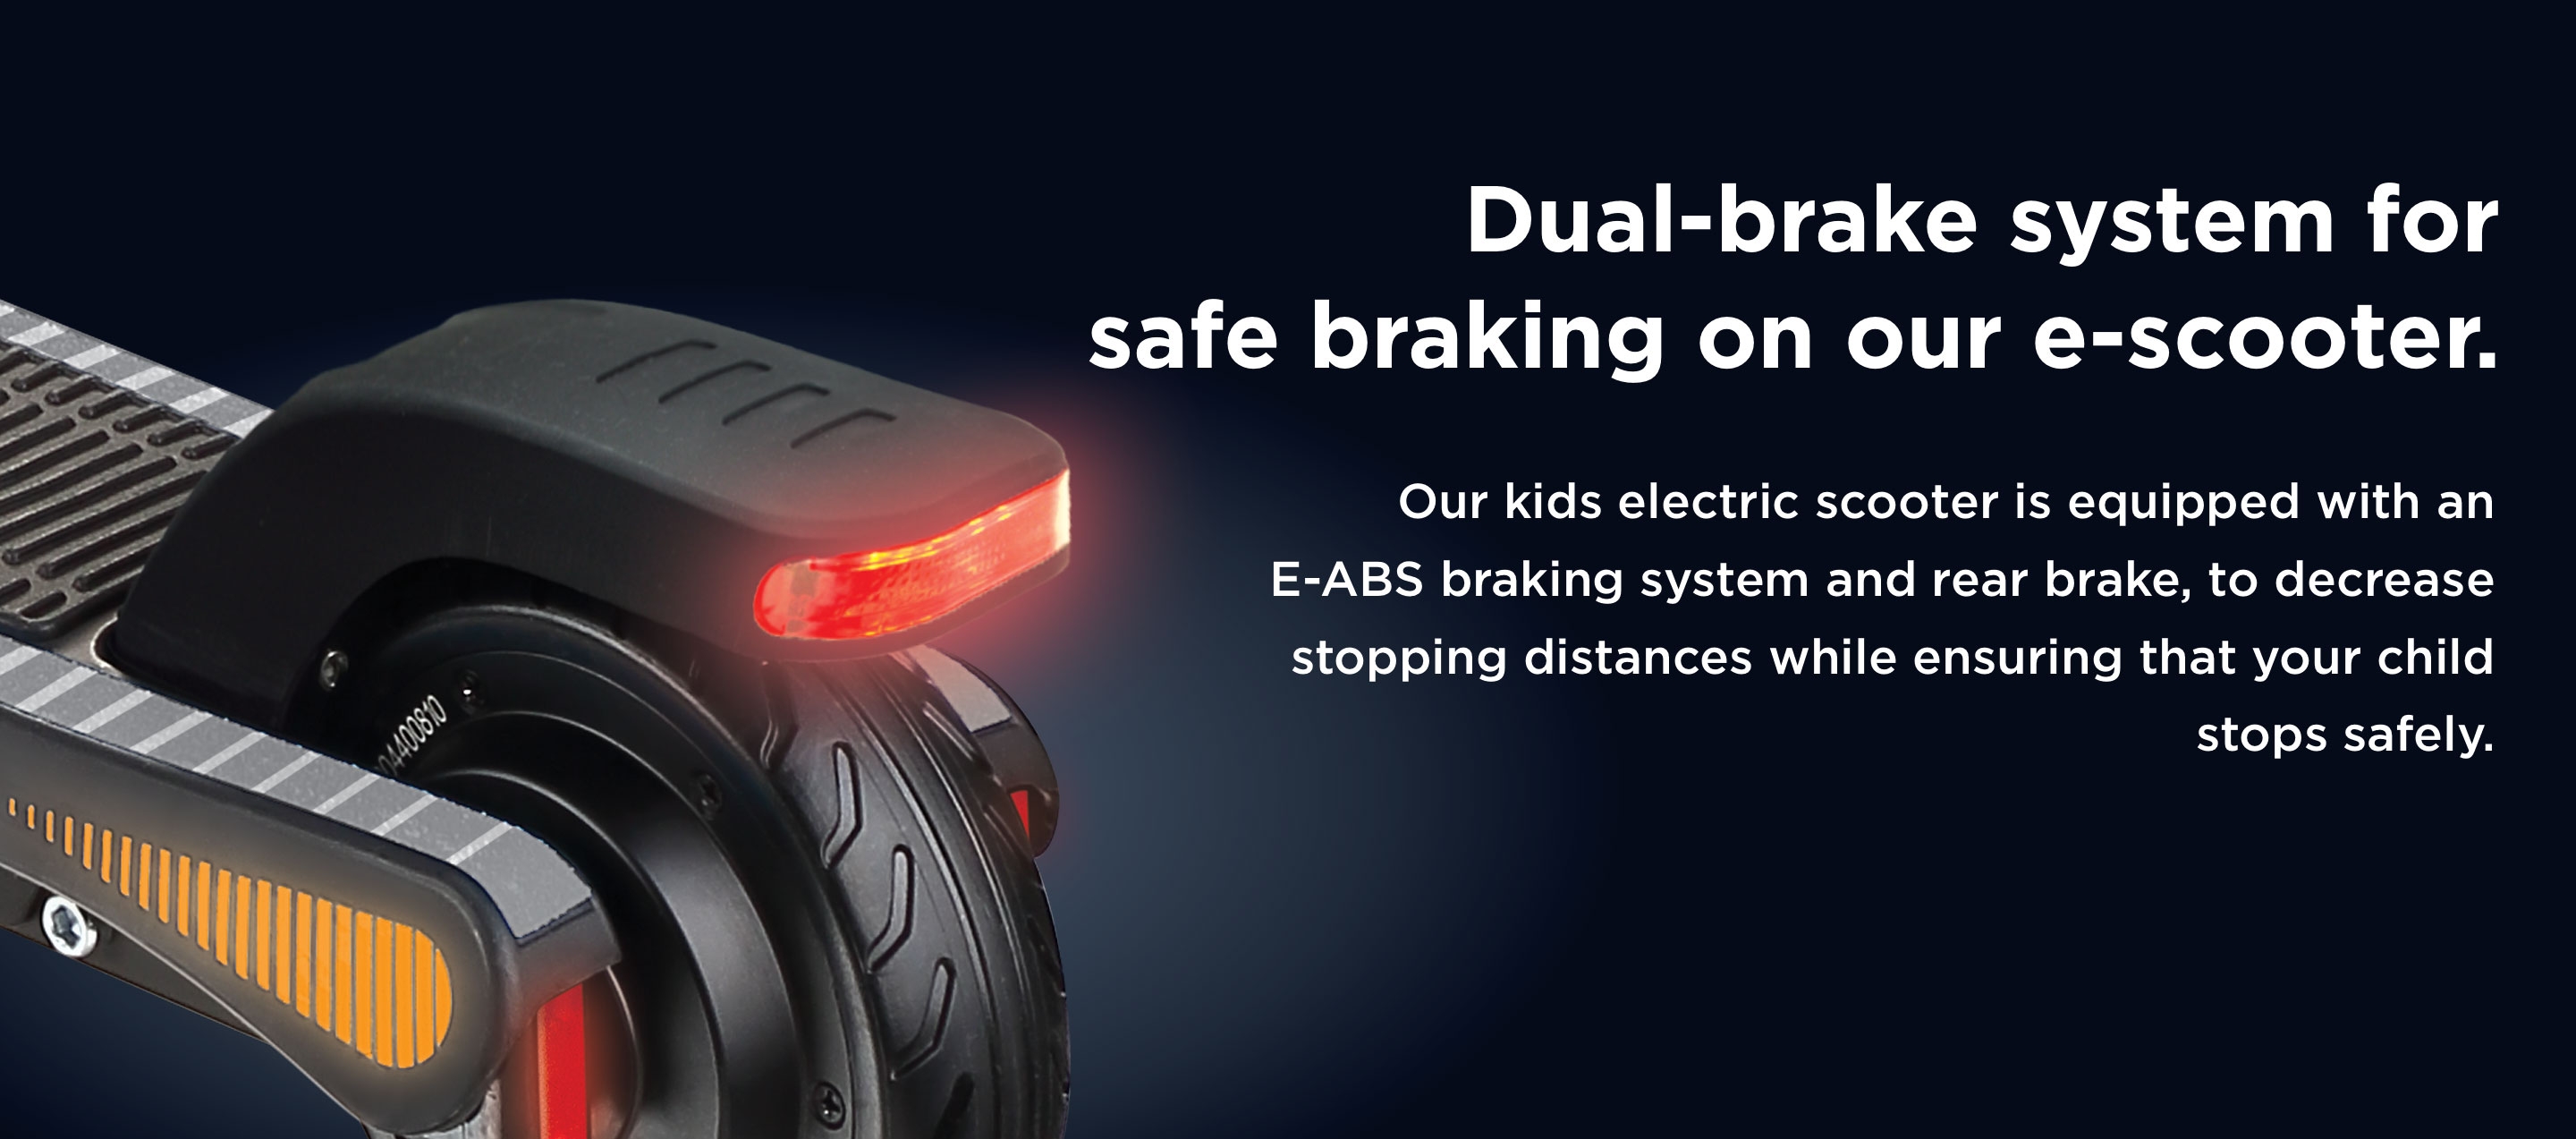 Dual-brake system for safe braking on our e-scooter. Our kids electric scooter is equipped with an E-ABS braking system and rear brake, to decrease stopping distances while ensuring that your child  stops safely. 